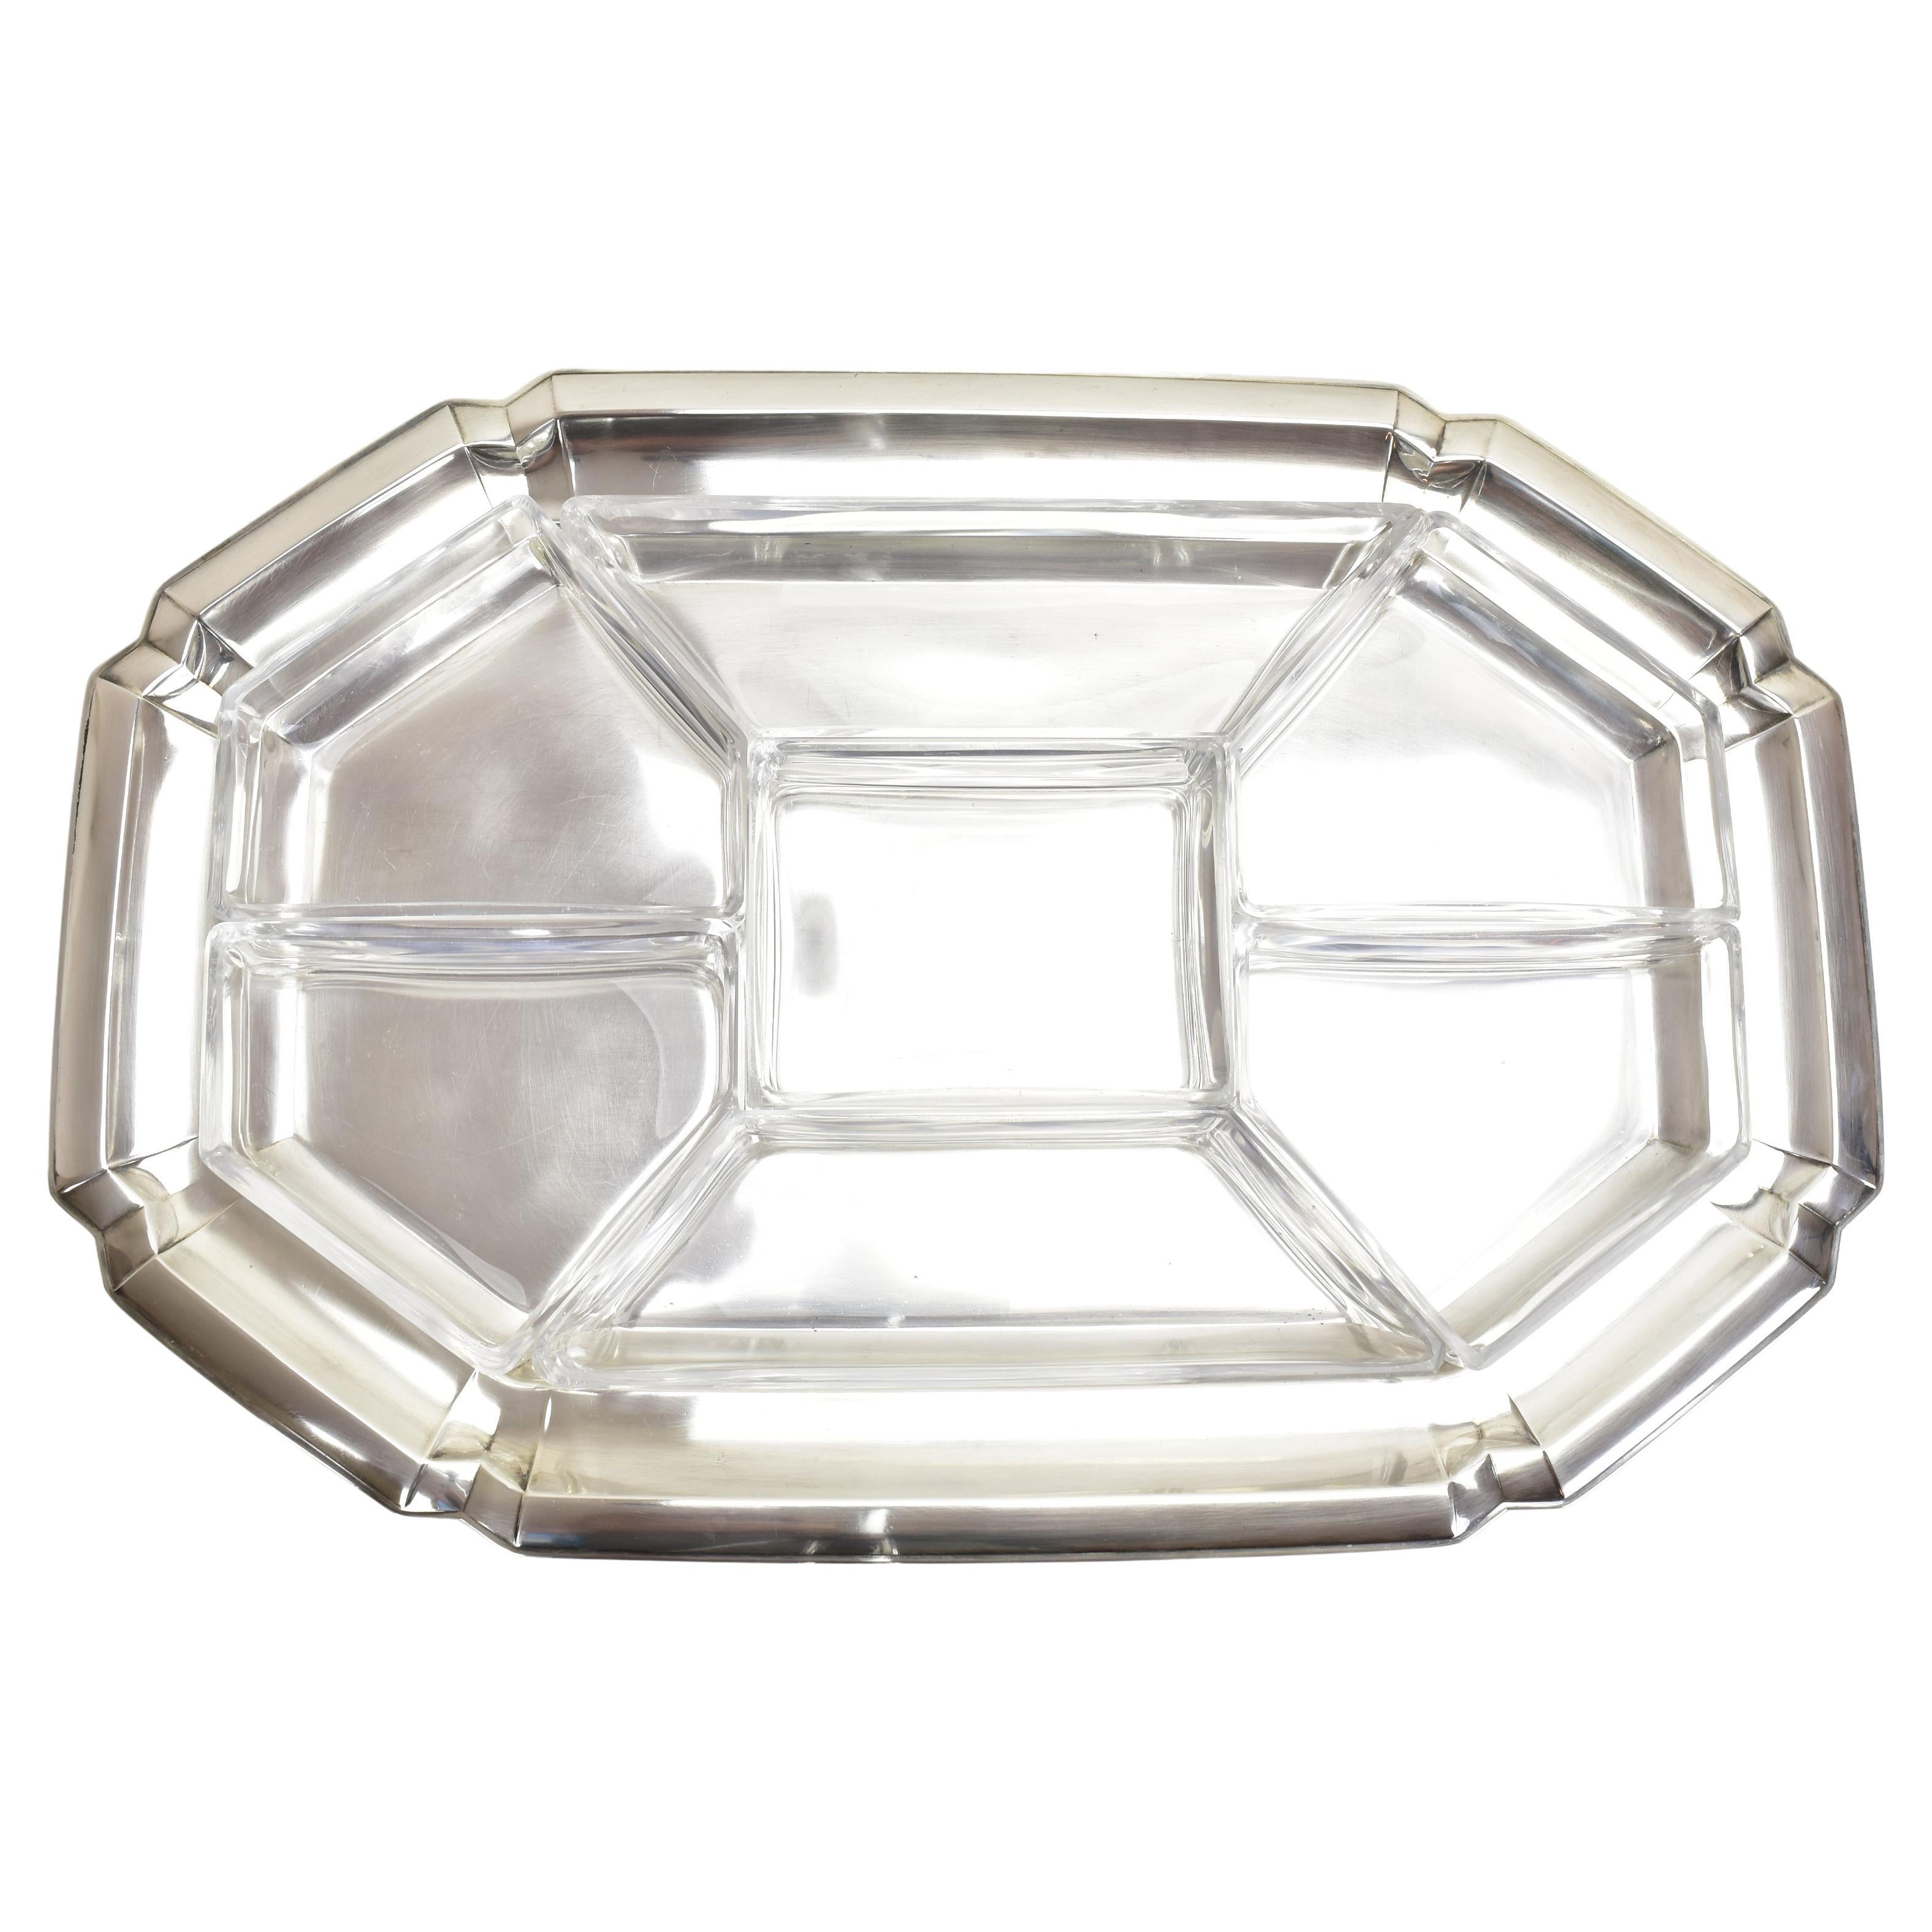 Large Art Deco Cabaret Bar Snack Tray by Quist Silverplate & Cut Crystal Liners For Sale